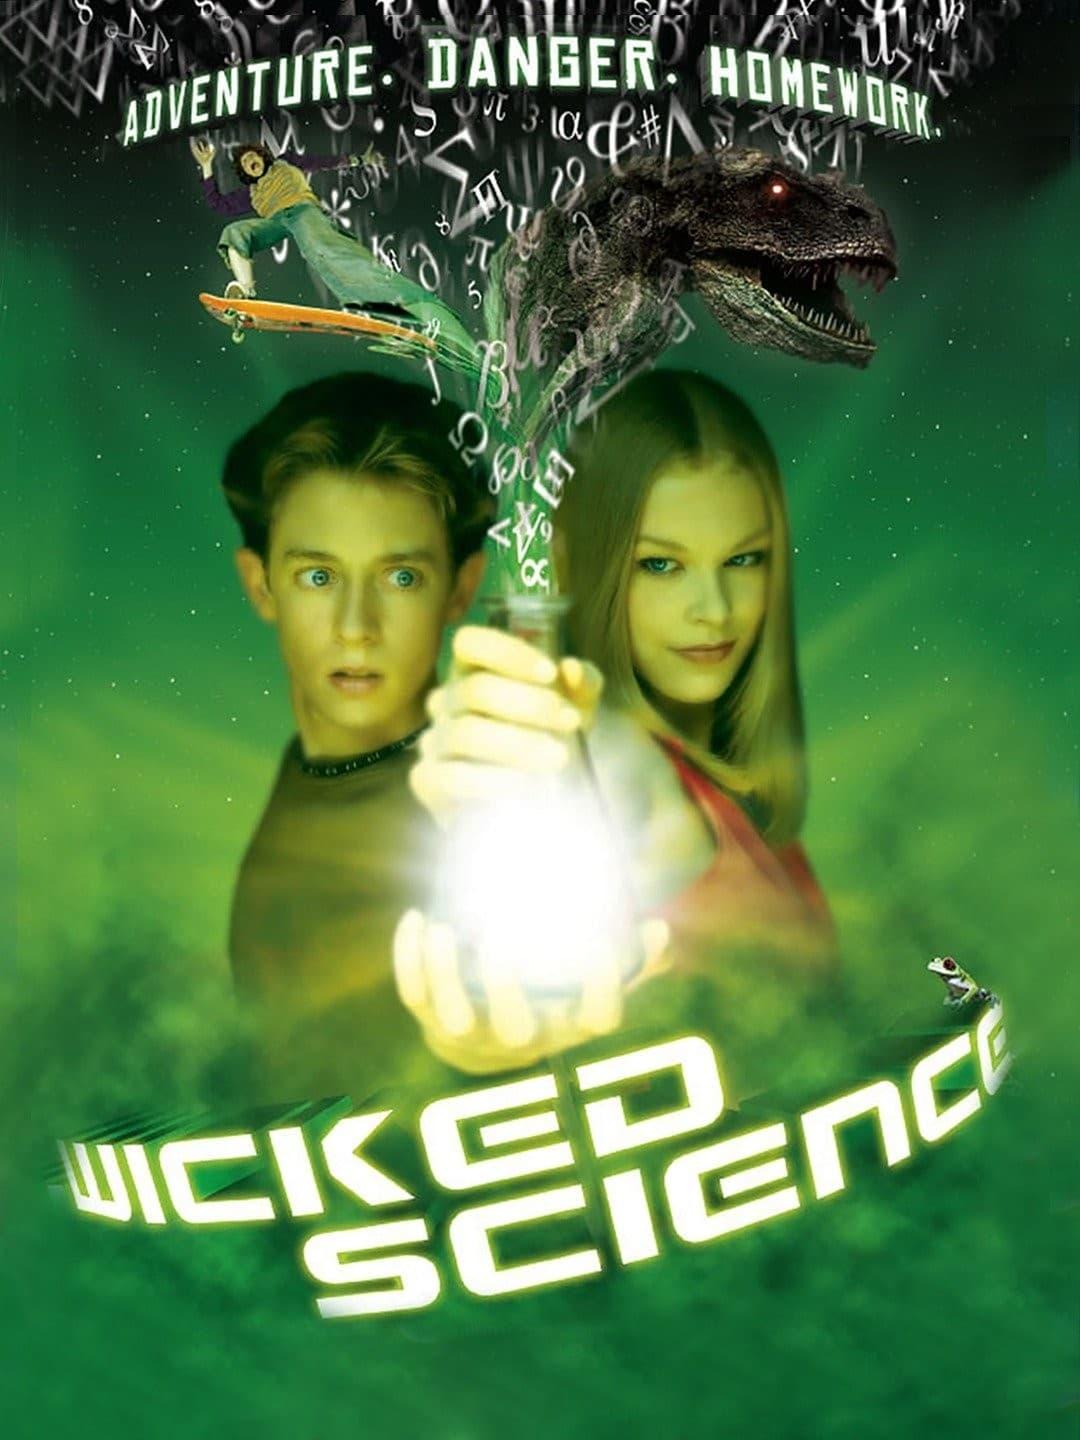 Wicked Science poster